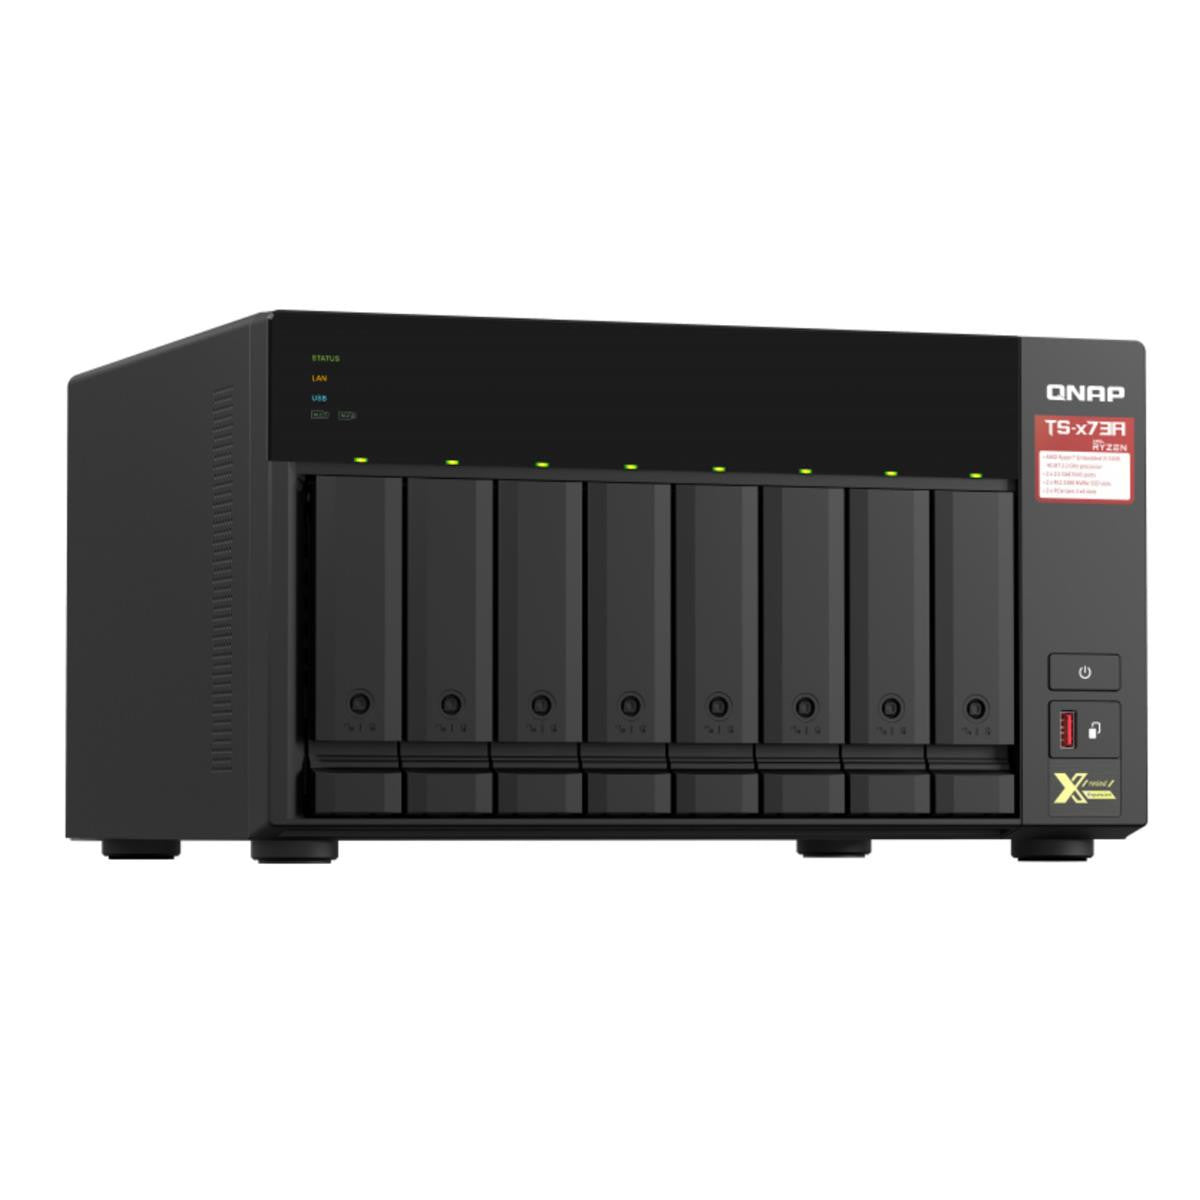 QNAP TS-873A 8-BAY NAS with 64GB DDR4 RAM and 80TB (8x10TB) Seagate Ironwolf NAS Drives Fully Assembled and Tested